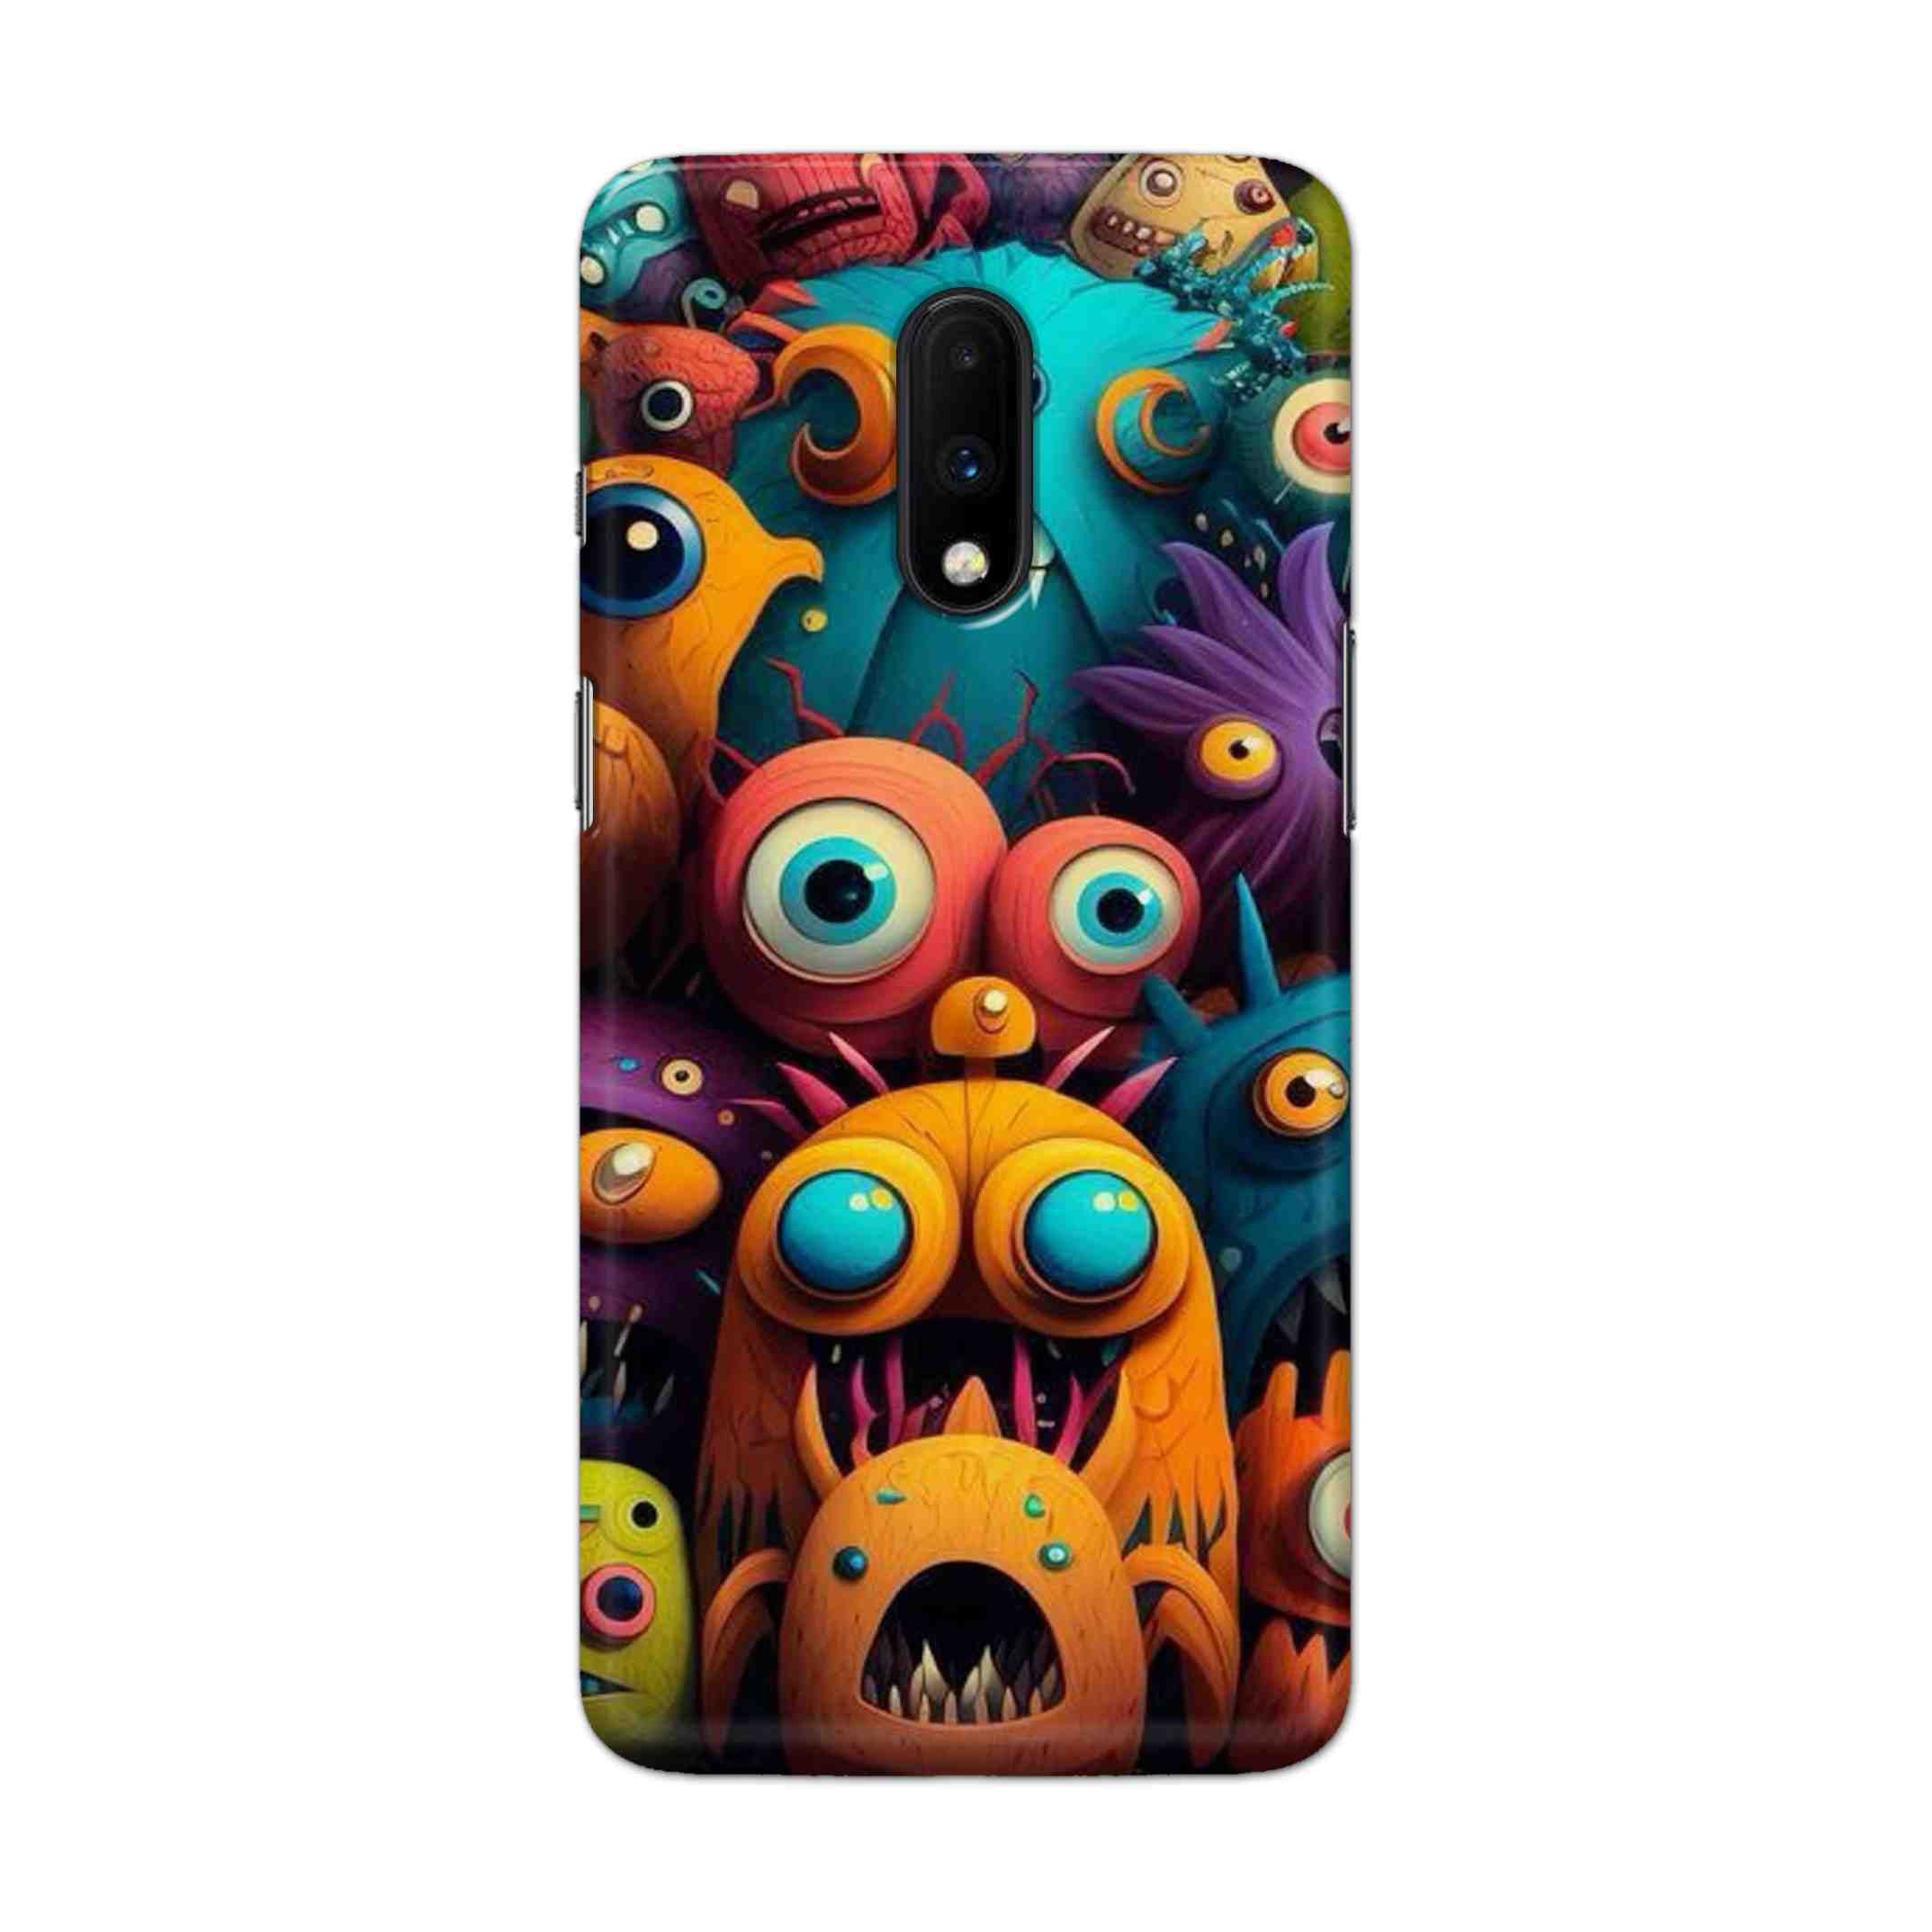 Buy Zombie Hard Back Mobile Phone Case Cover For OnePlus 7 Online